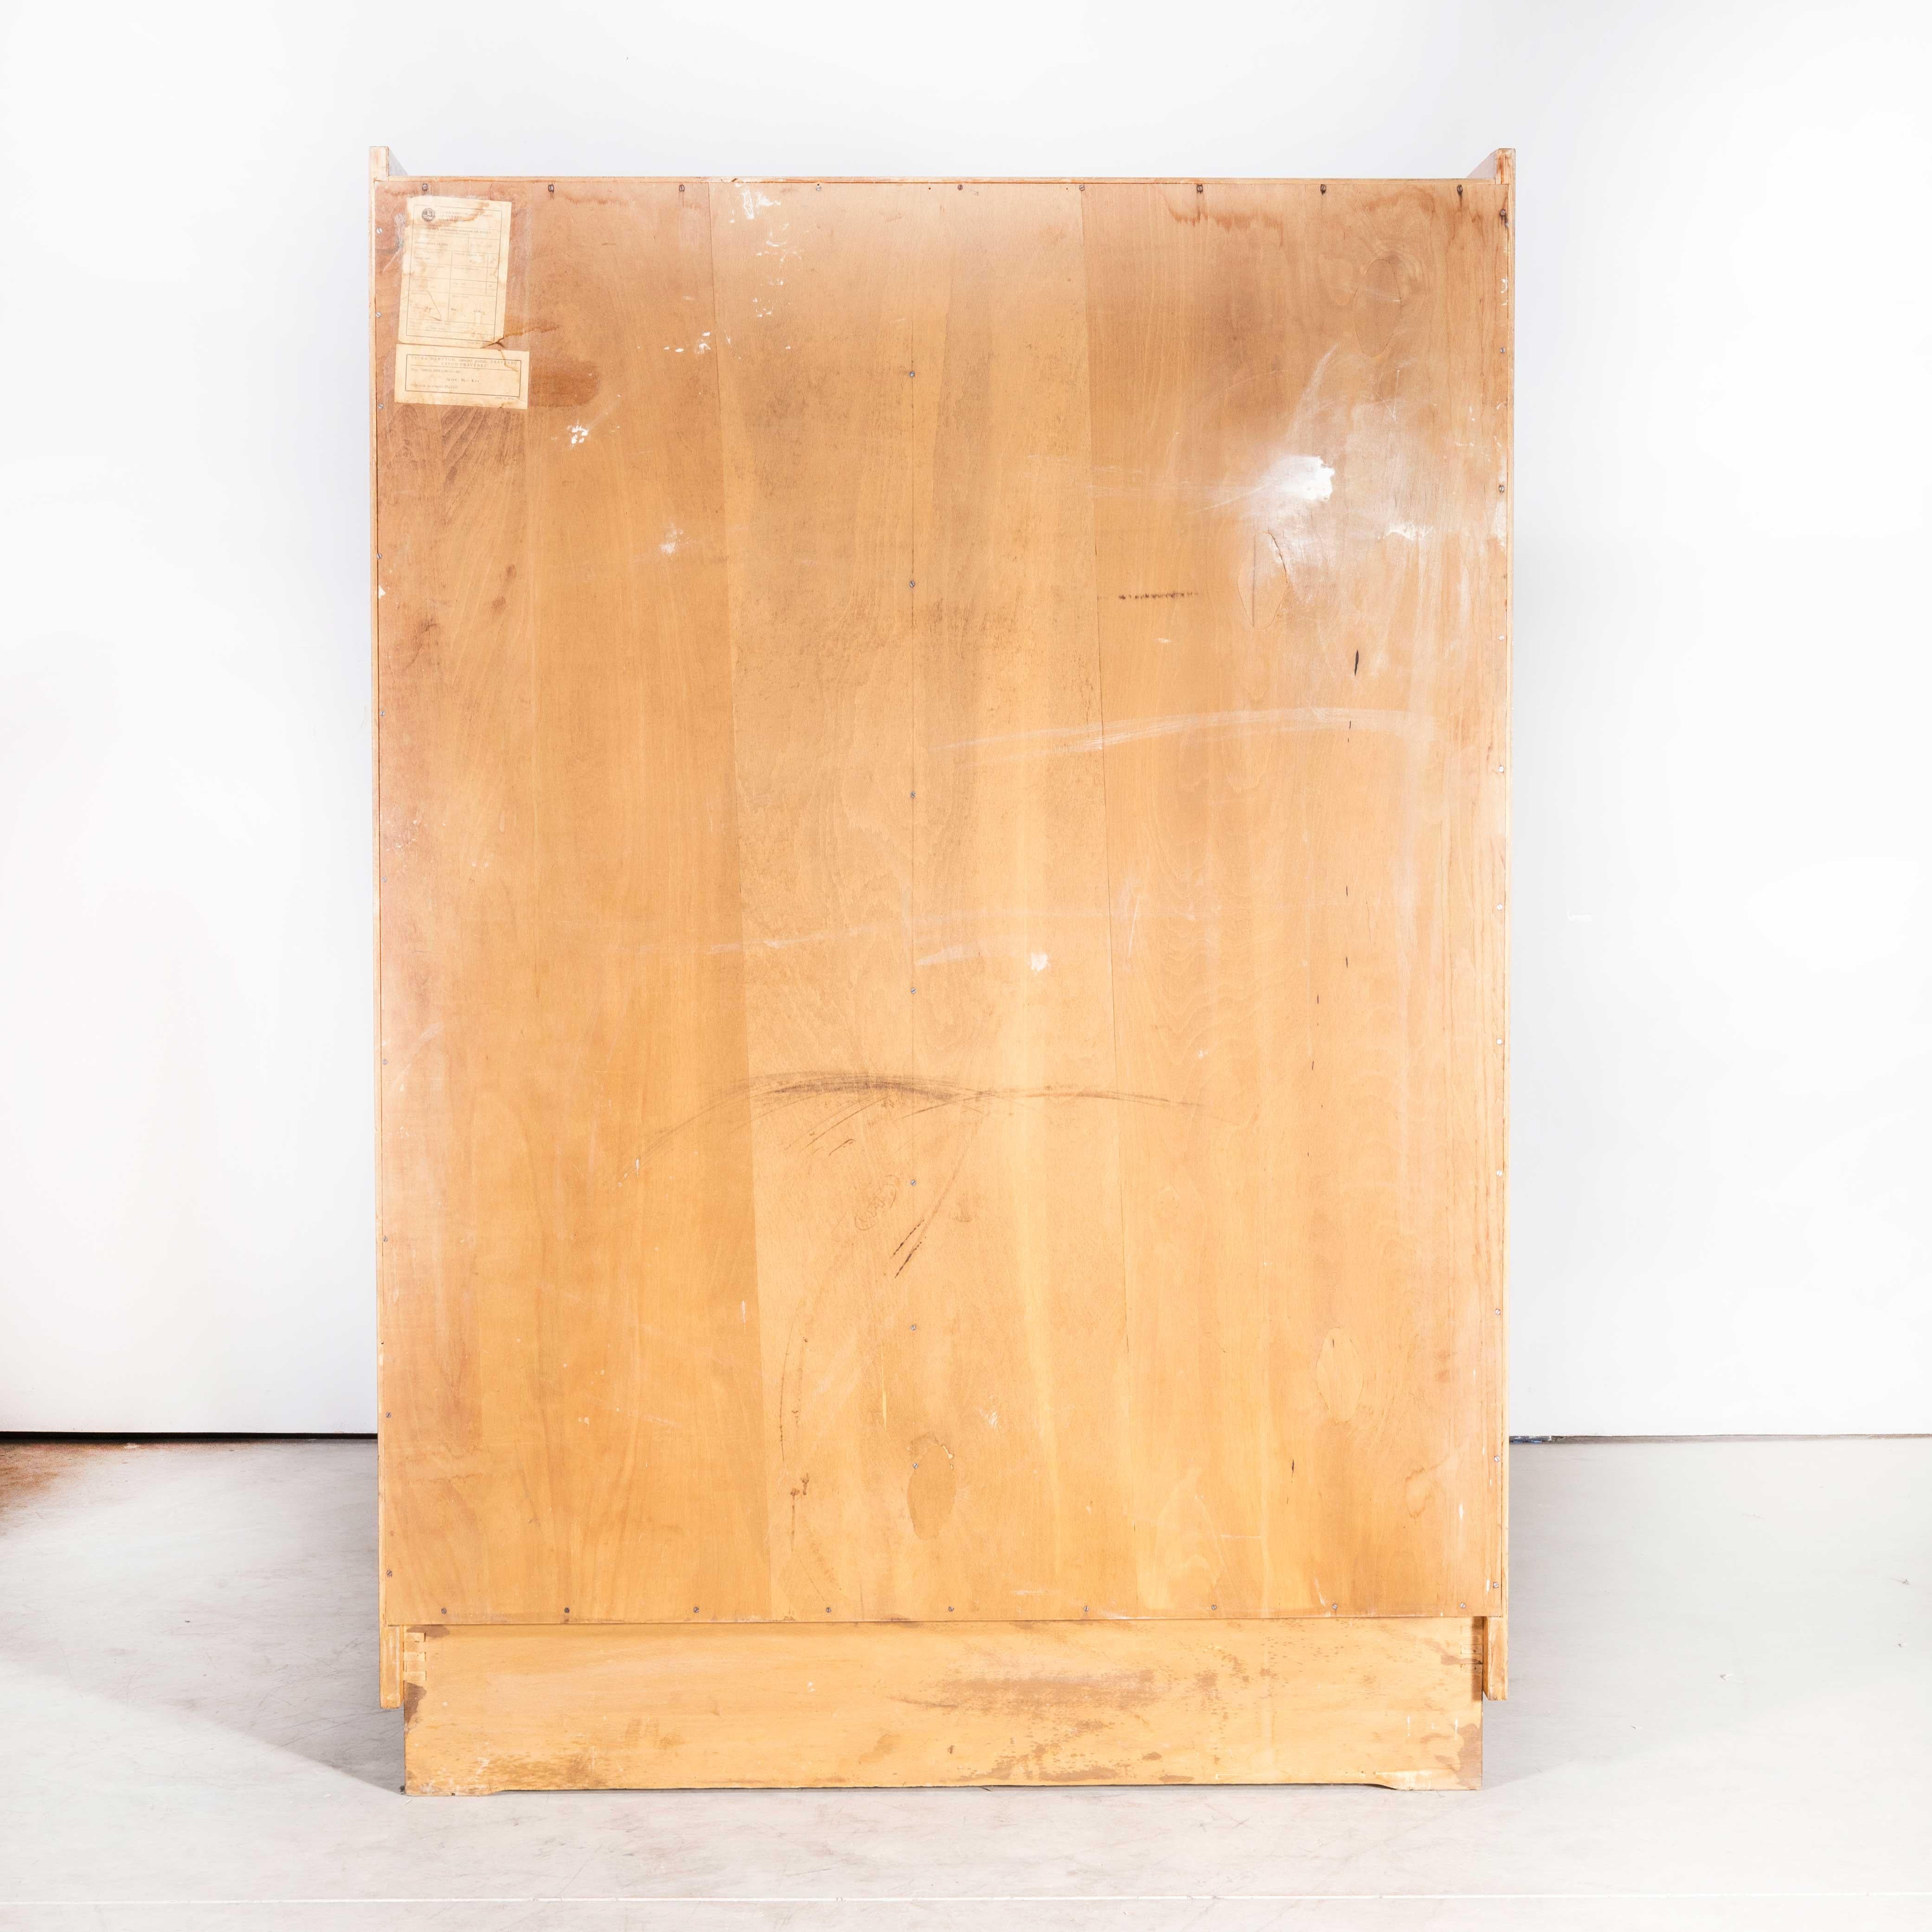 1950s Good Sized Fitted Wardrobe By By Tatra Pravenec
1950s Good Sized Fitted Wardrobe By Tatra Pravenec. Produced by Tatra Pravenec in the Czech Republic. Czech design will always be affiliated to the Bauhaus movement which inspired a generation